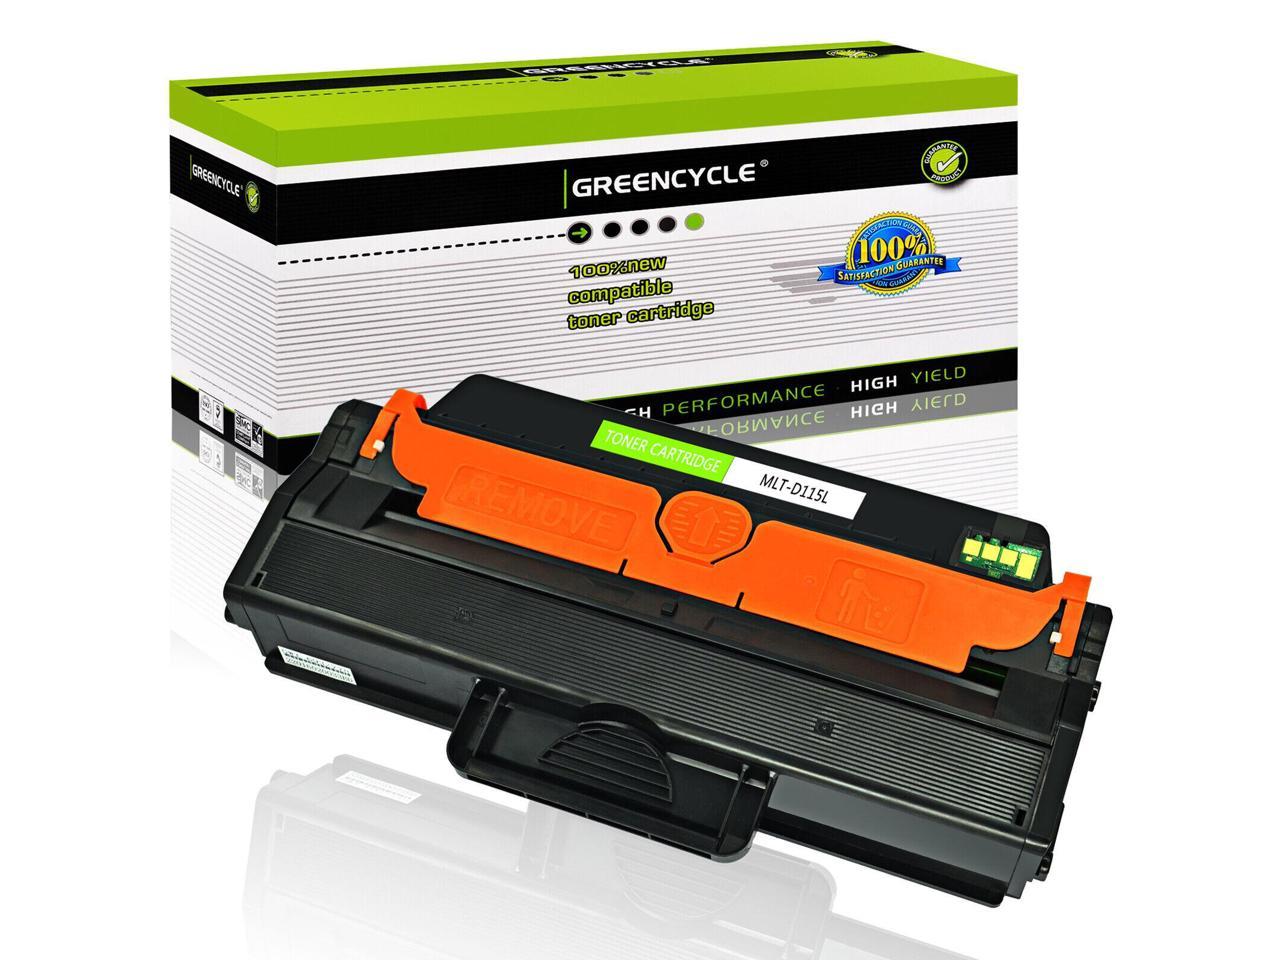 GREENCYCLE 2 Pack MLT-D115L D115L Black High Yield Toner Cartridge Compatible for Samsung Xpress SL-M2830DW SL-M2880FW SL-M2670 SL-M2620 SL-2620ND SL-2820DW SL-2820ND M2670FN M2670N M2870FD M2870FW 